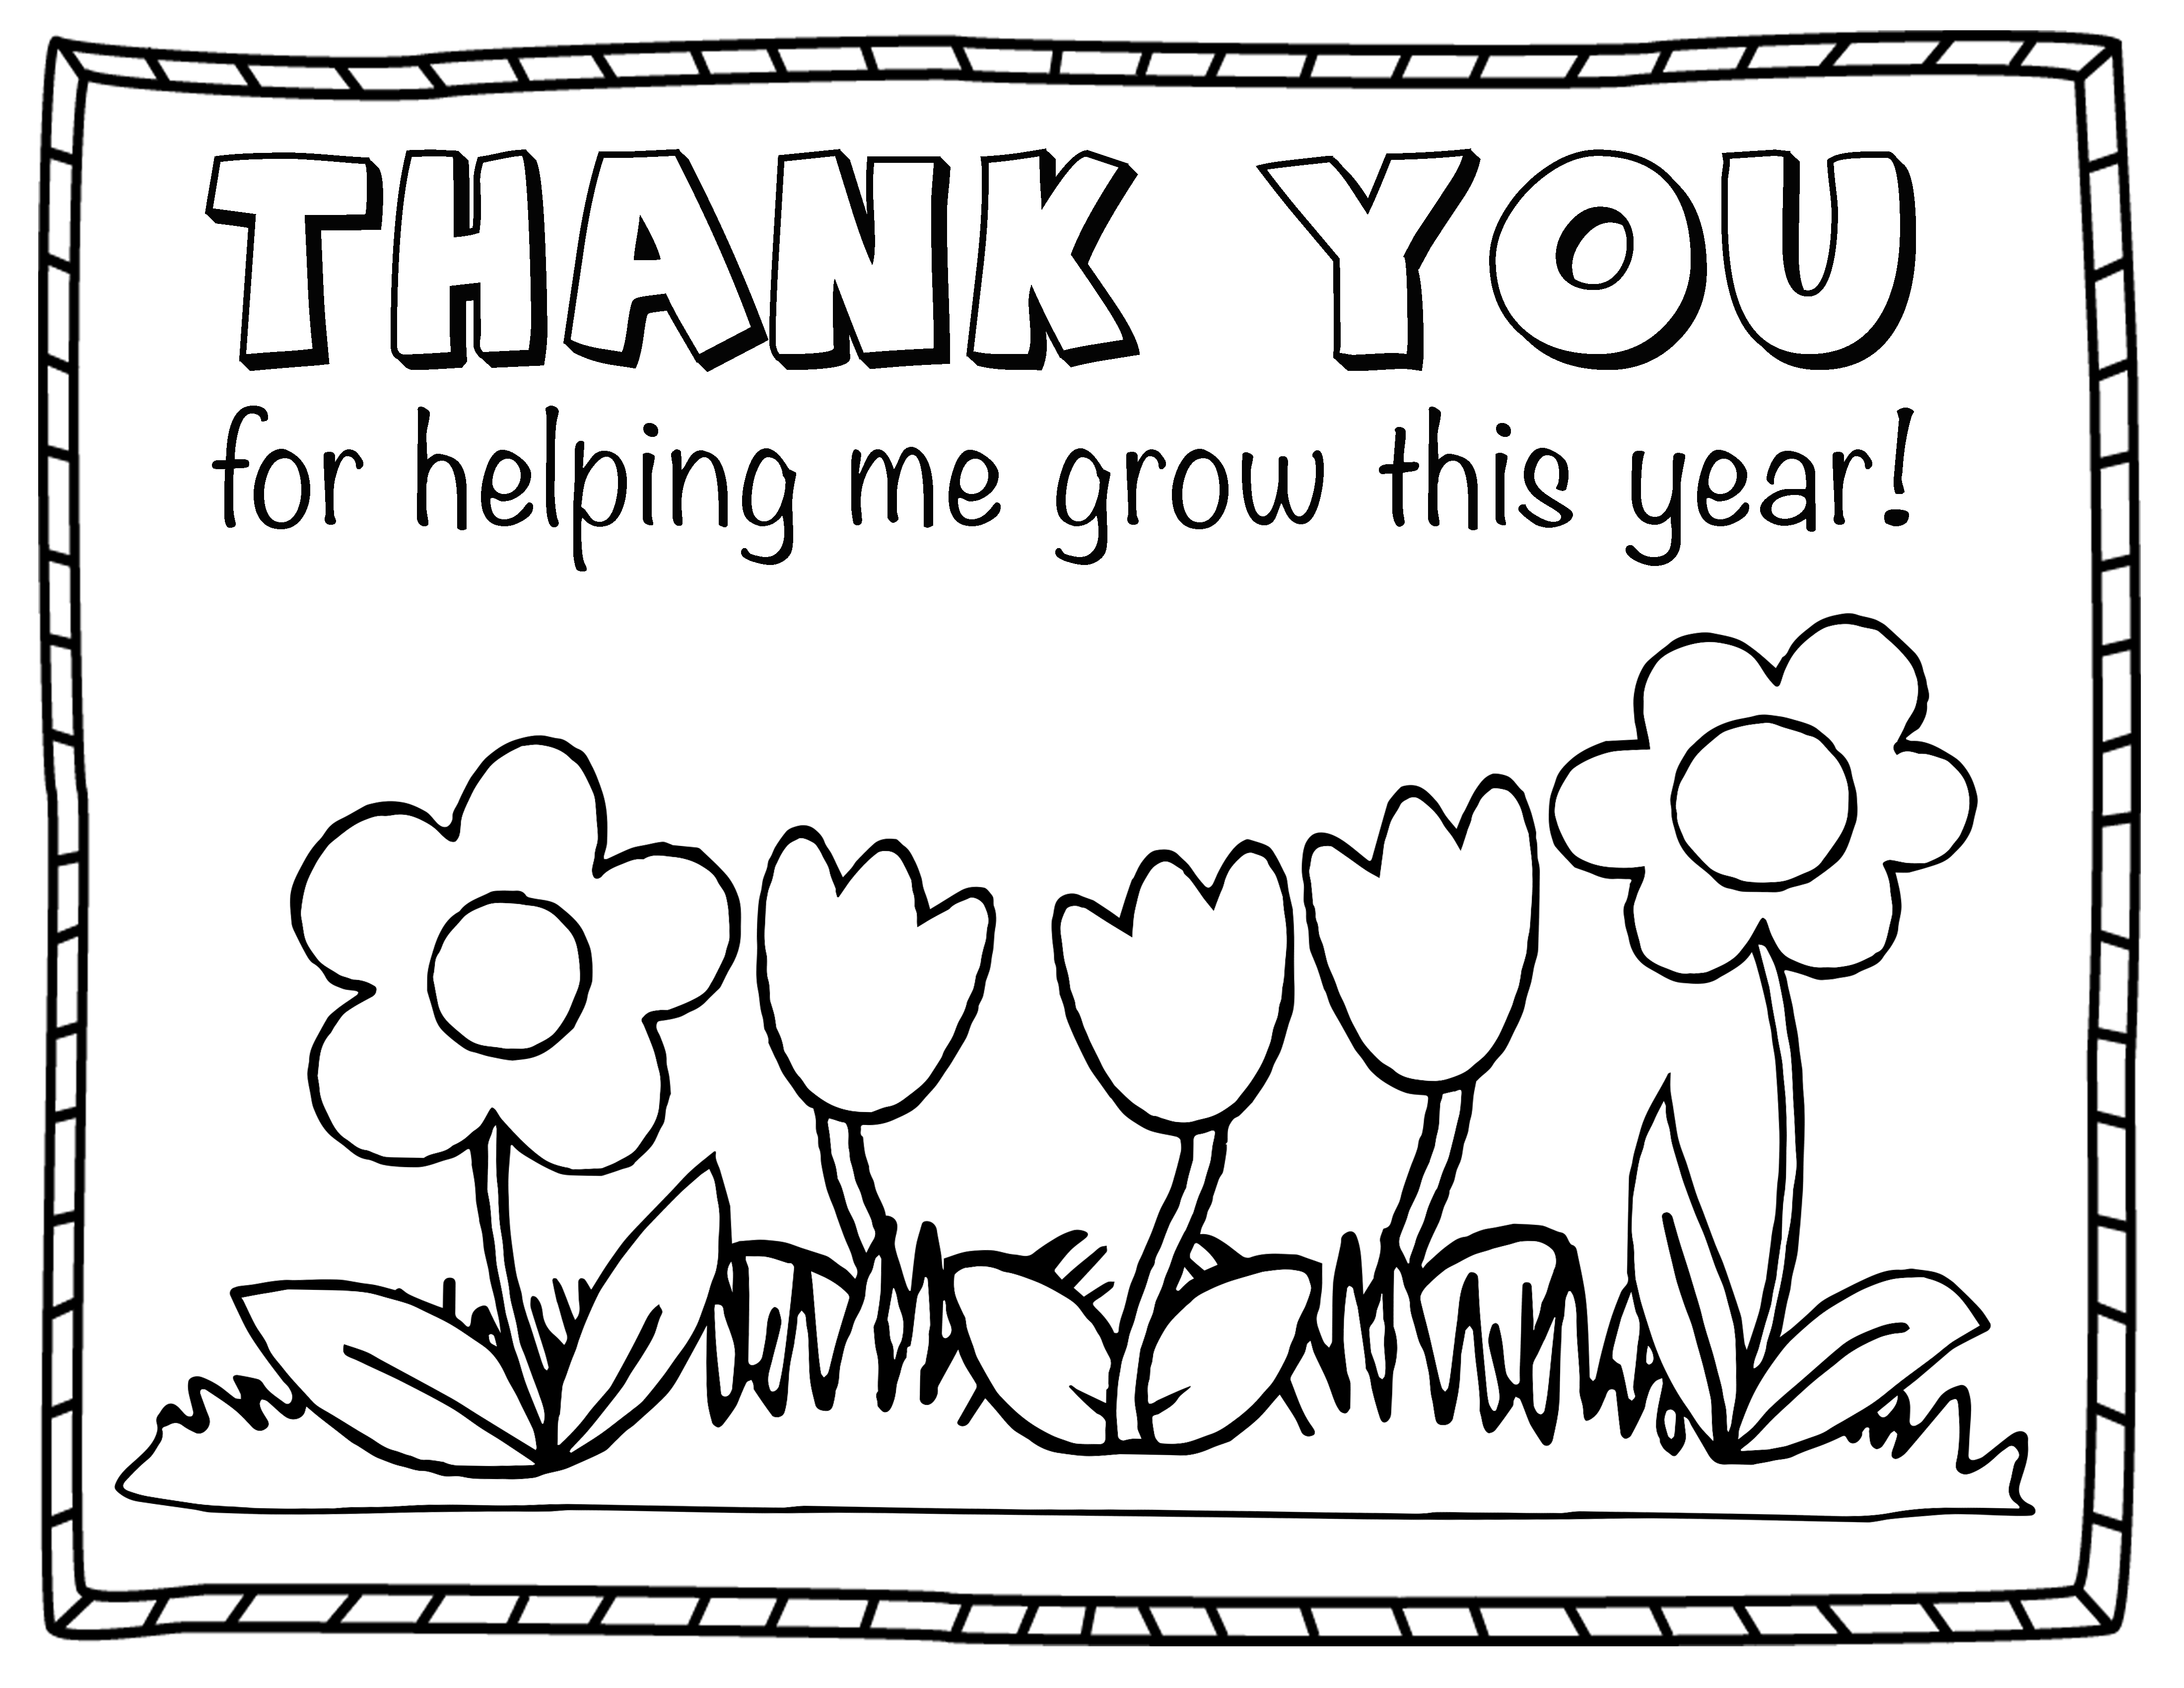 Coloring Pages : Teacher Appreciation Coloring Page Projects In - Free Printable Teacher Appreciation Cards To Color